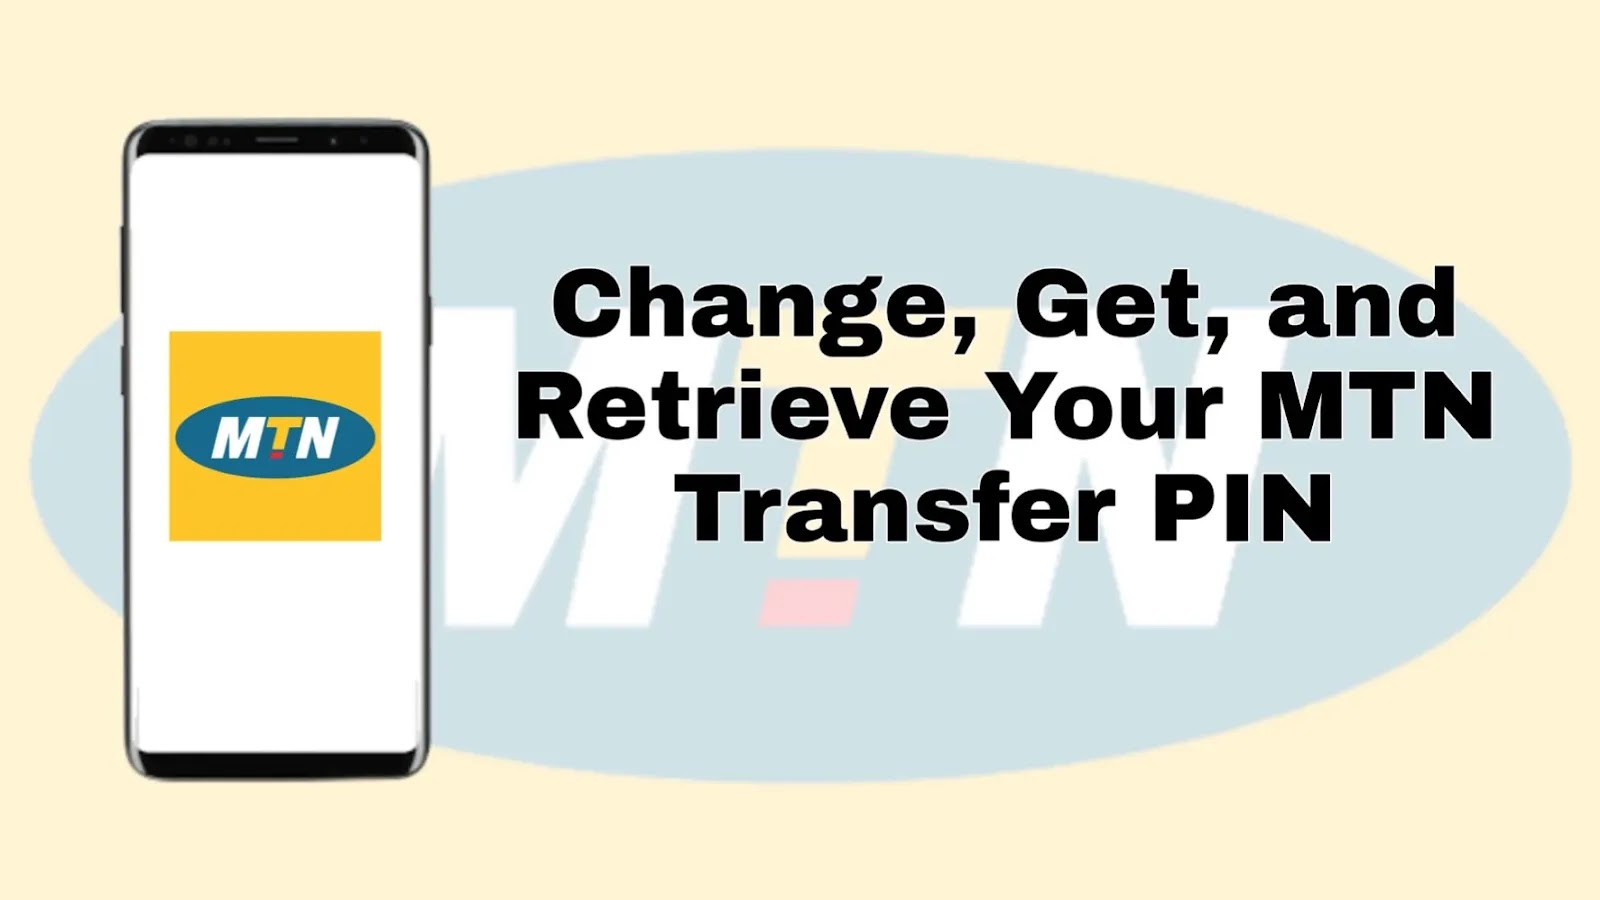 How to Change, Get, and Retrieve MTN Transfer PIN Step by Step